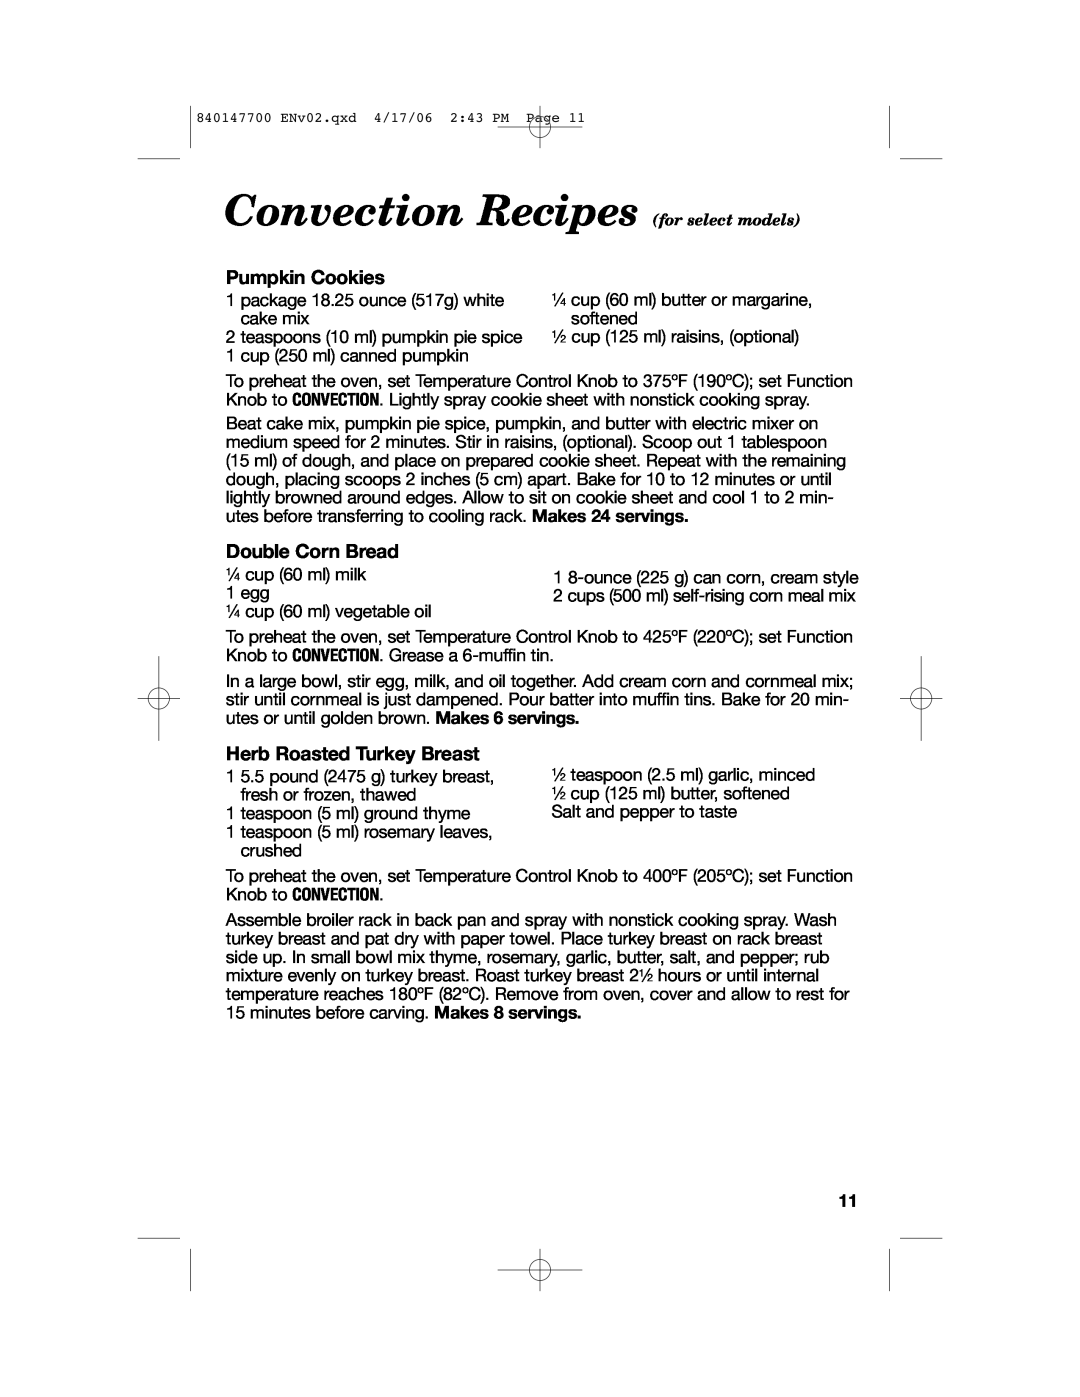 Hamilton Beach 31180 Convection Recipes for select models, Pumpkin Cookies, Double Corn Bread, Herb Roasted Turkey Breast 